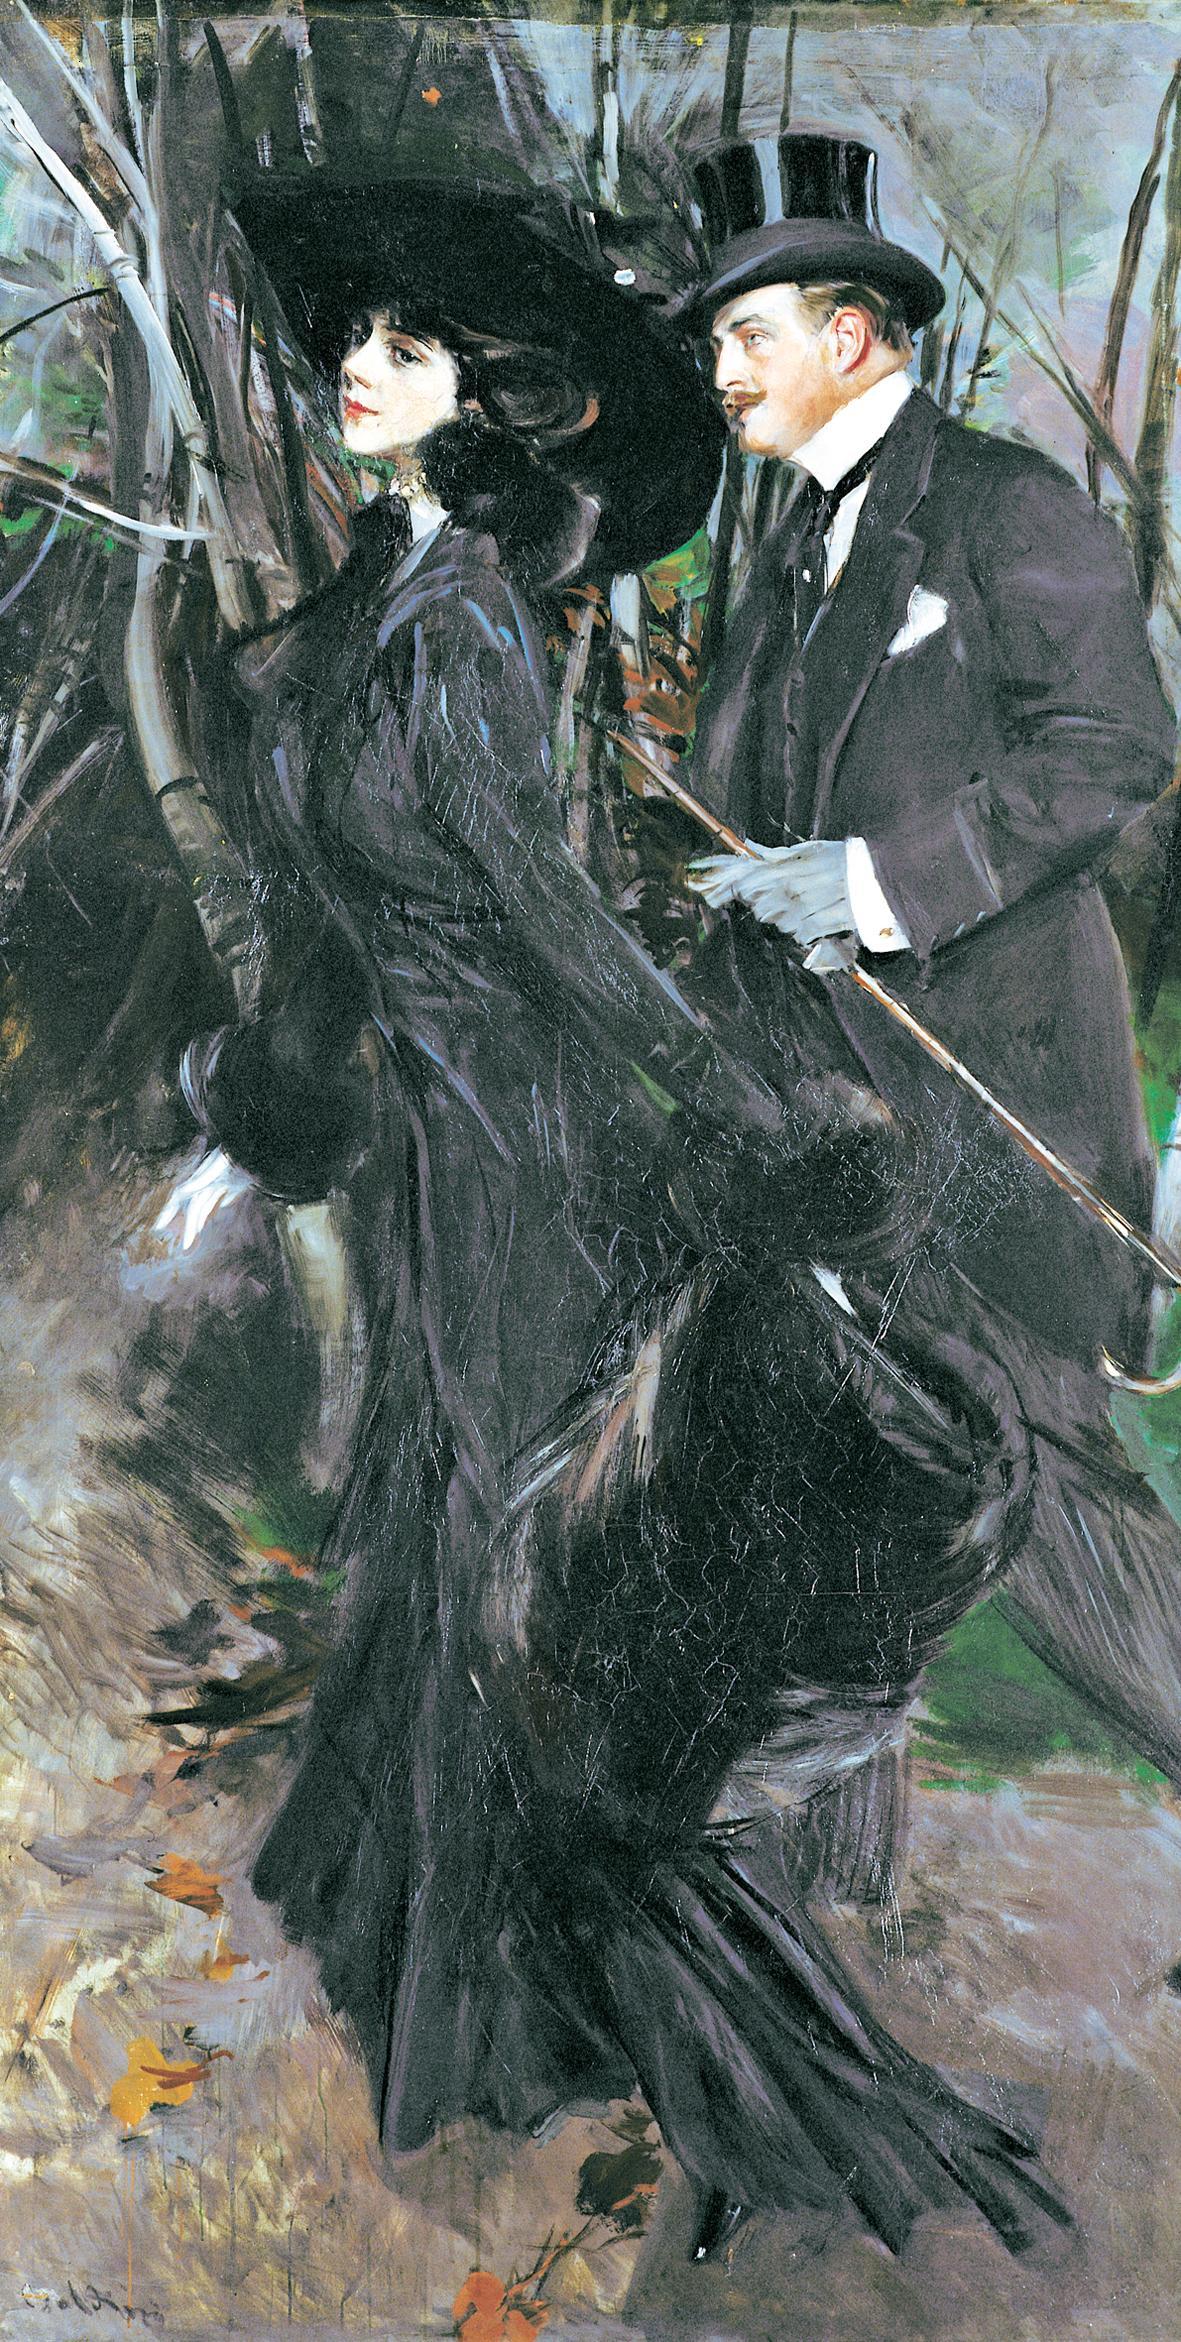 A man in a suit standing behind a woman in a dress in a thicket